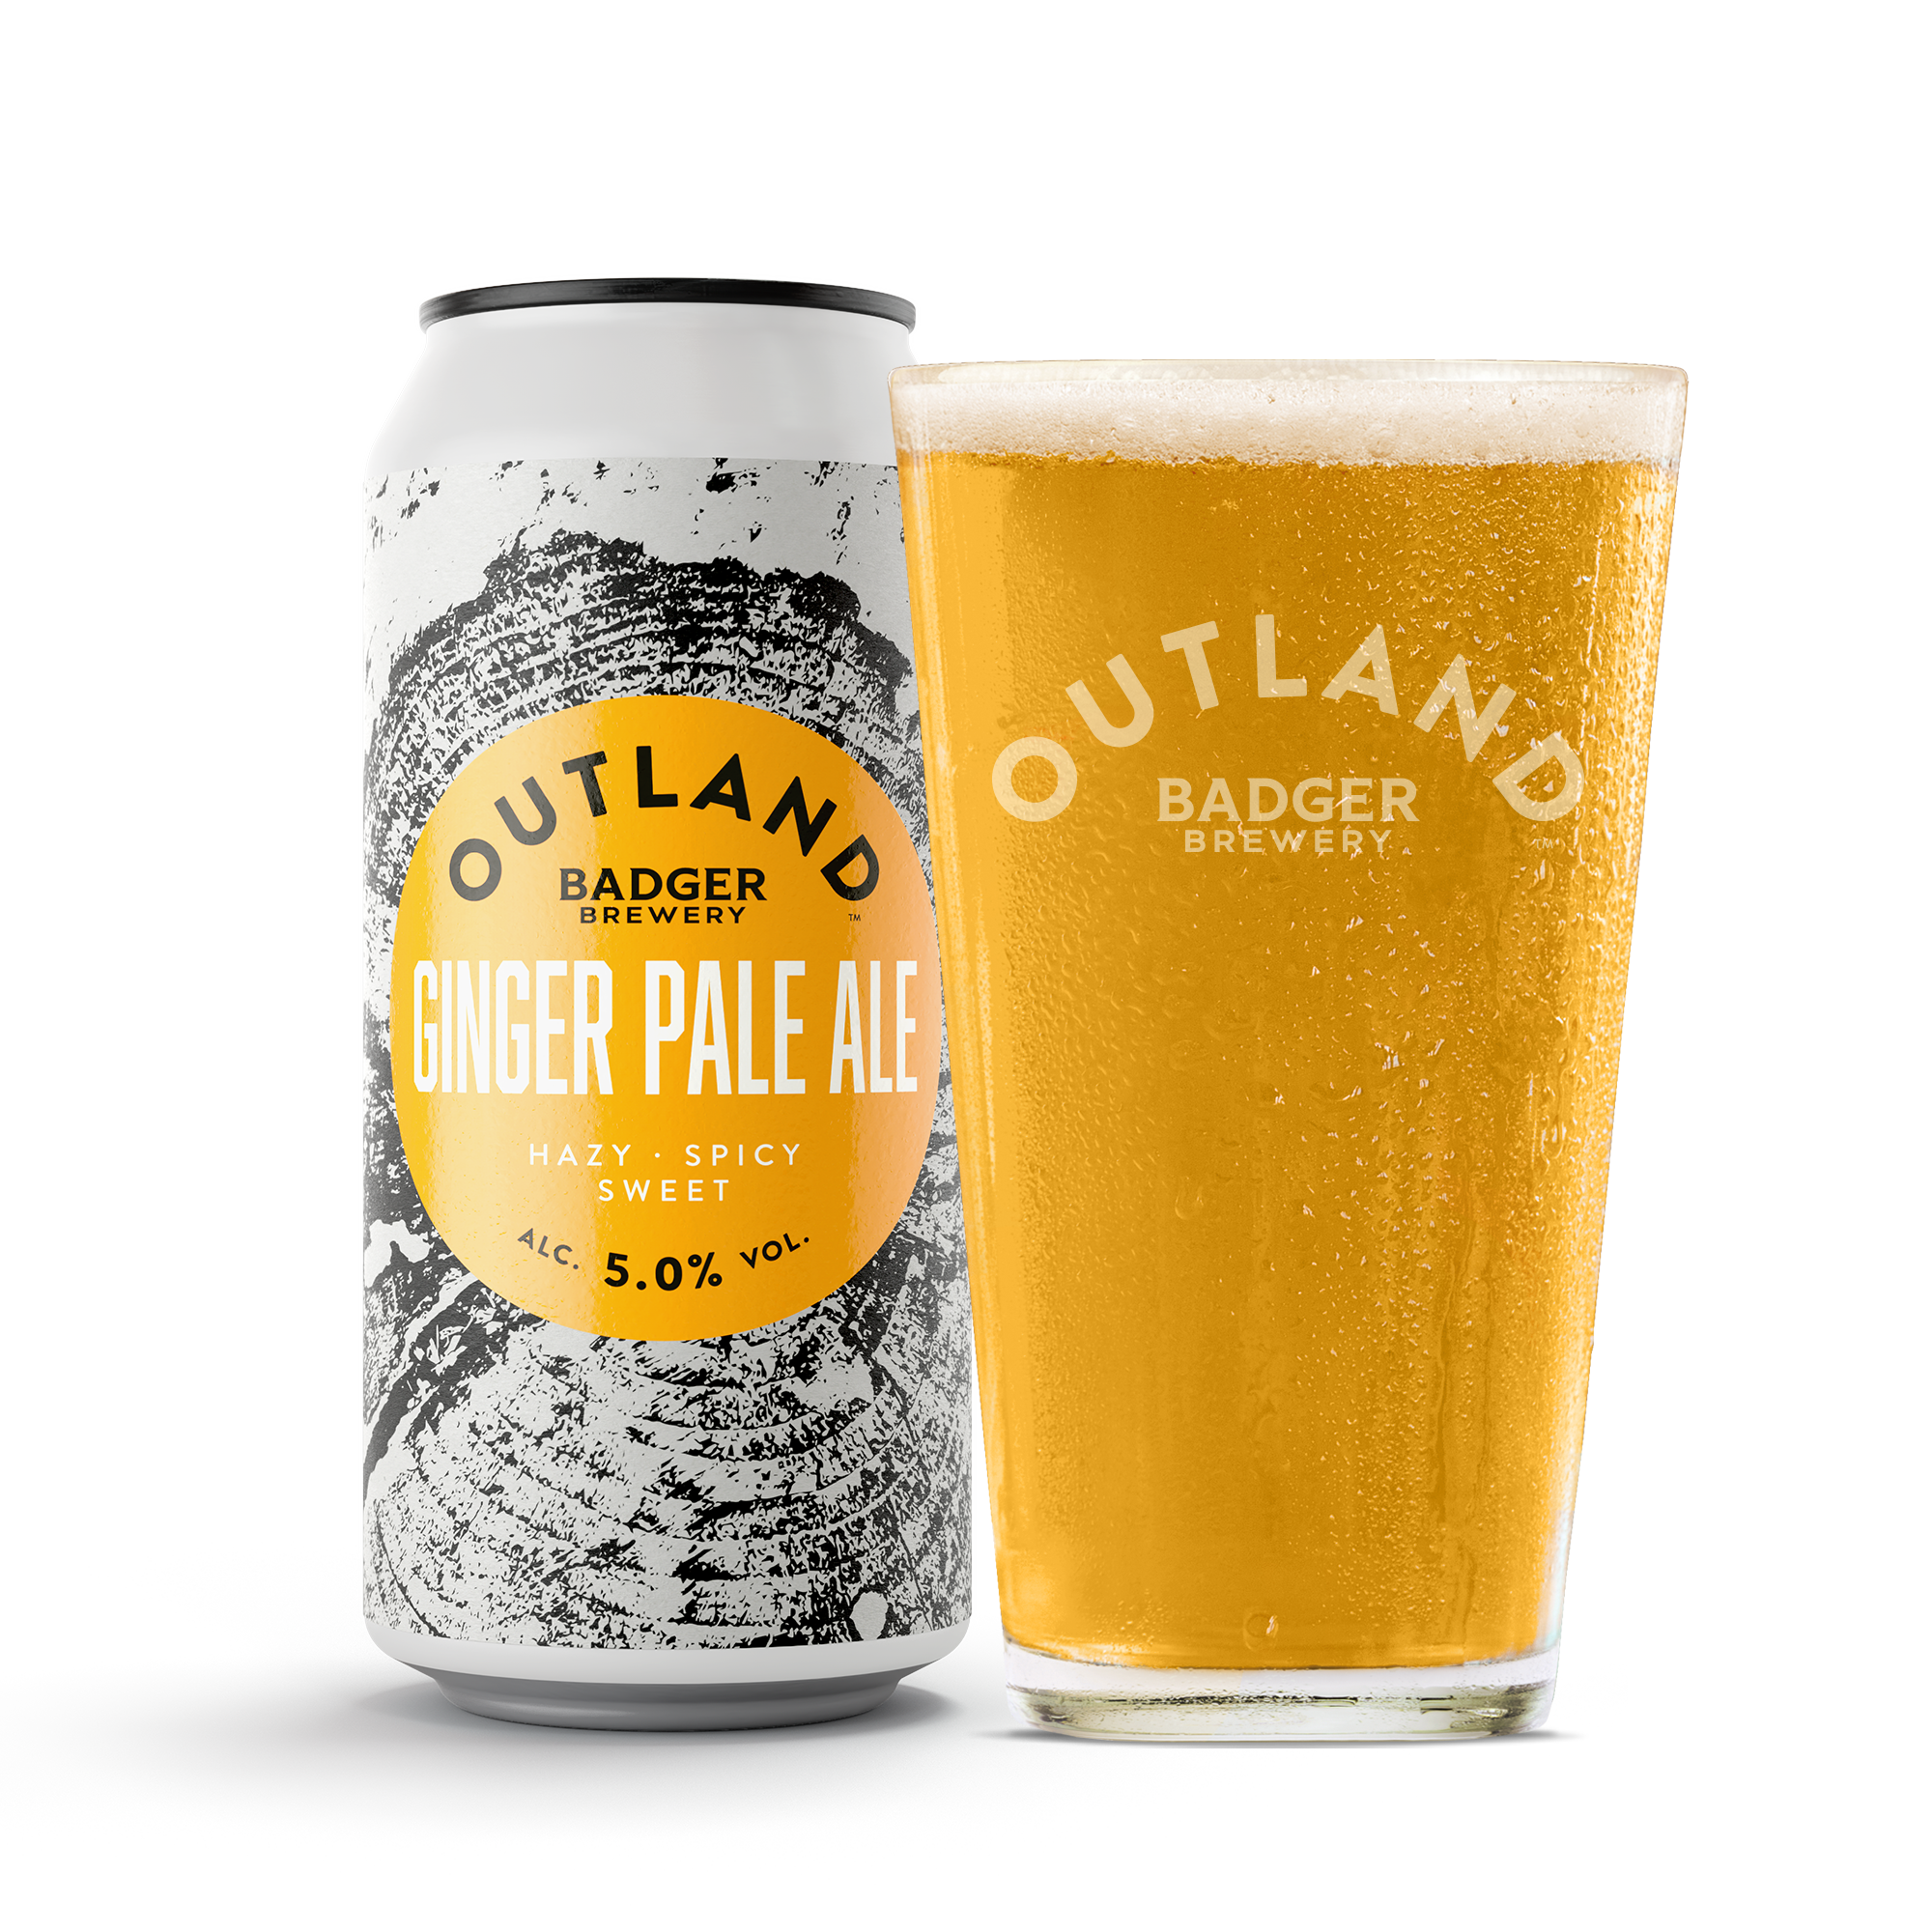 Outland Ginger Pale Ale can and glass